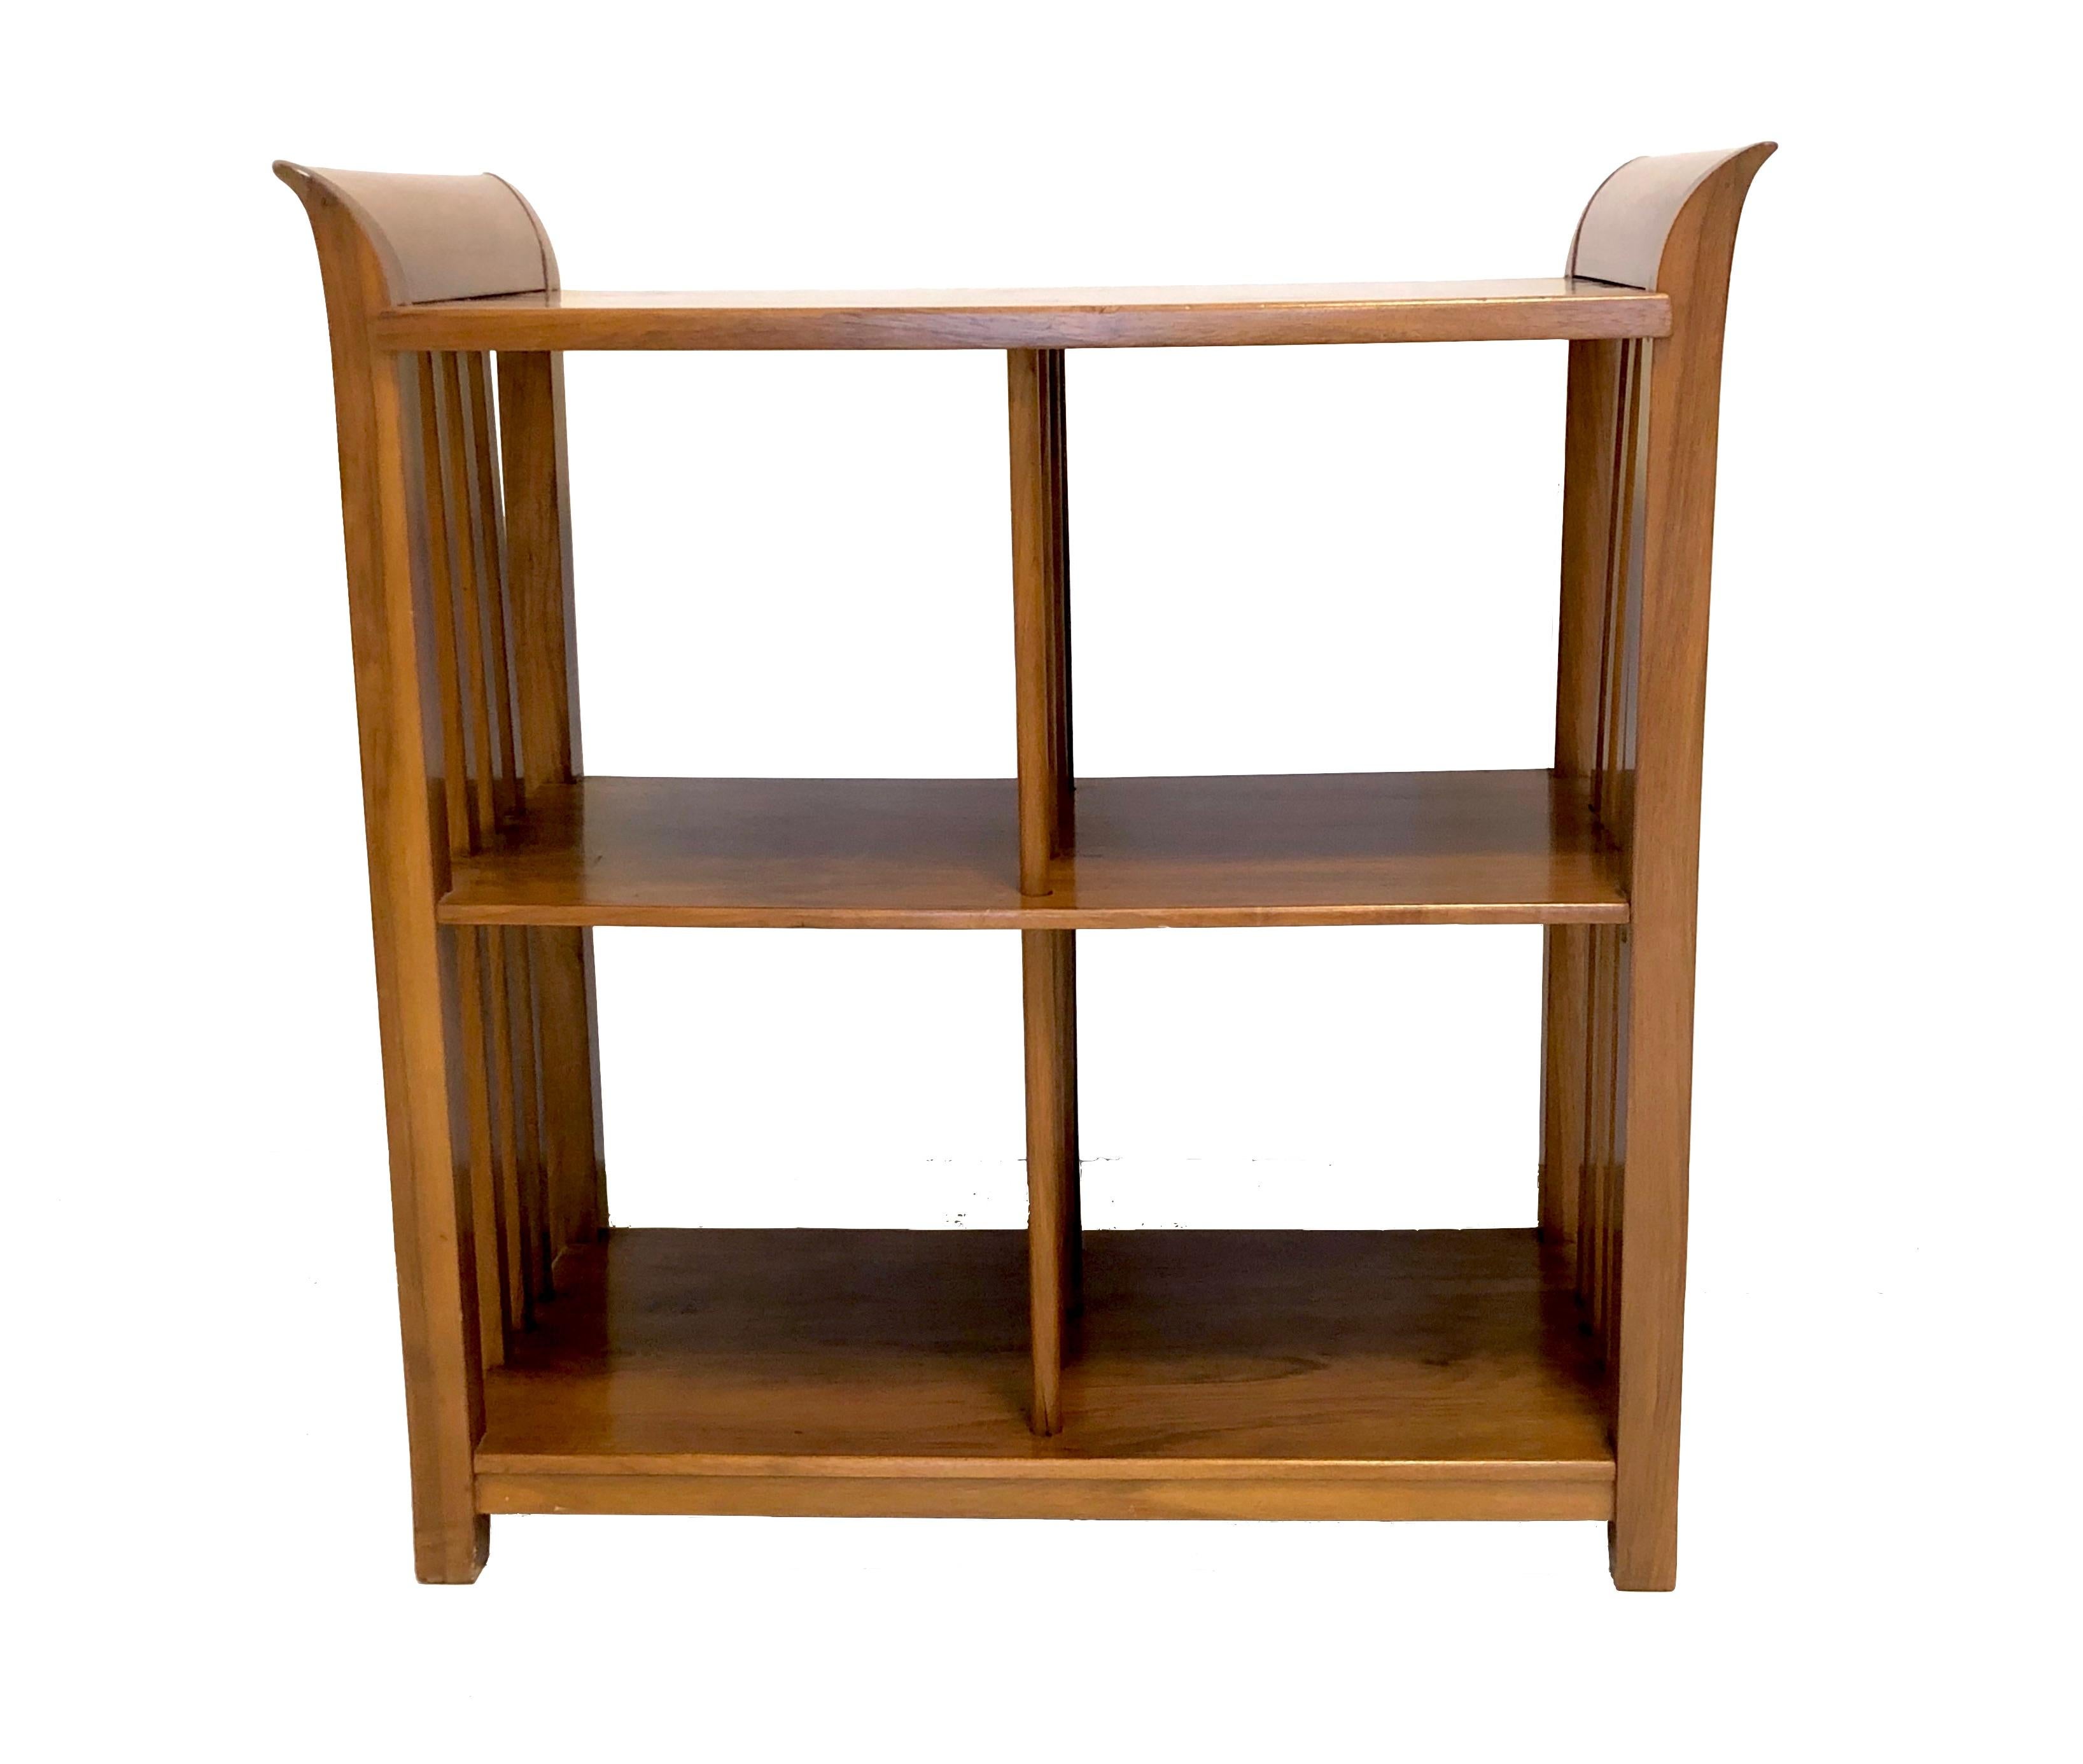 The chique bookcase – étagère– was designed by Bruno Paul ( 1847-1968 ) in circa 1915-1920. It is made out of mahagony.